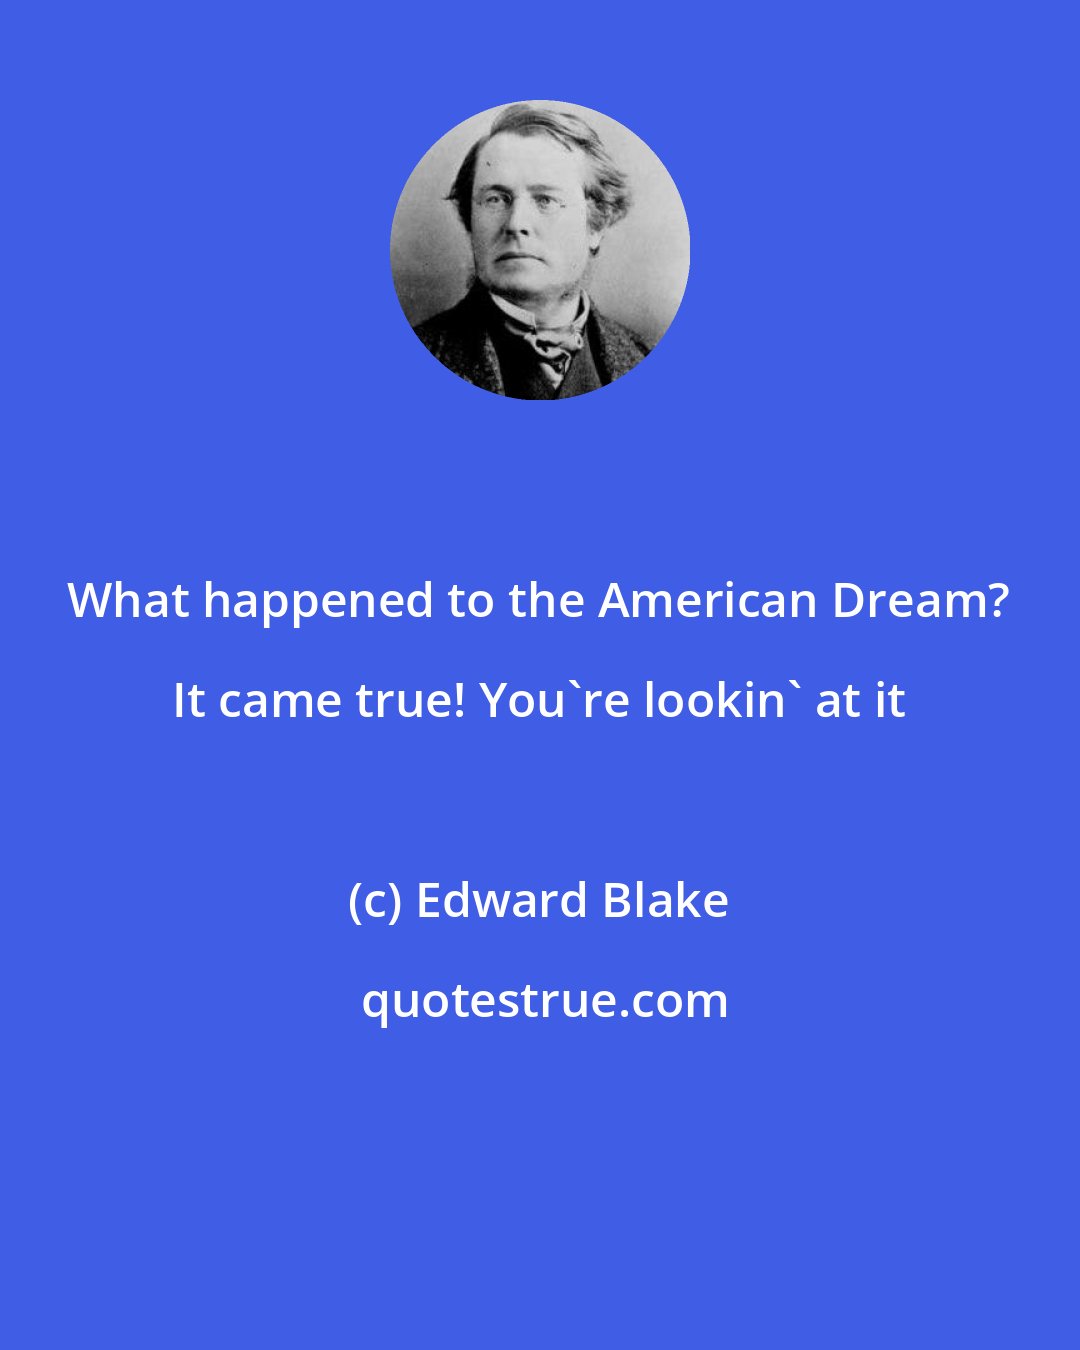 Edward Blake: What happened to the American Dream? It came true! You're lookin' at it